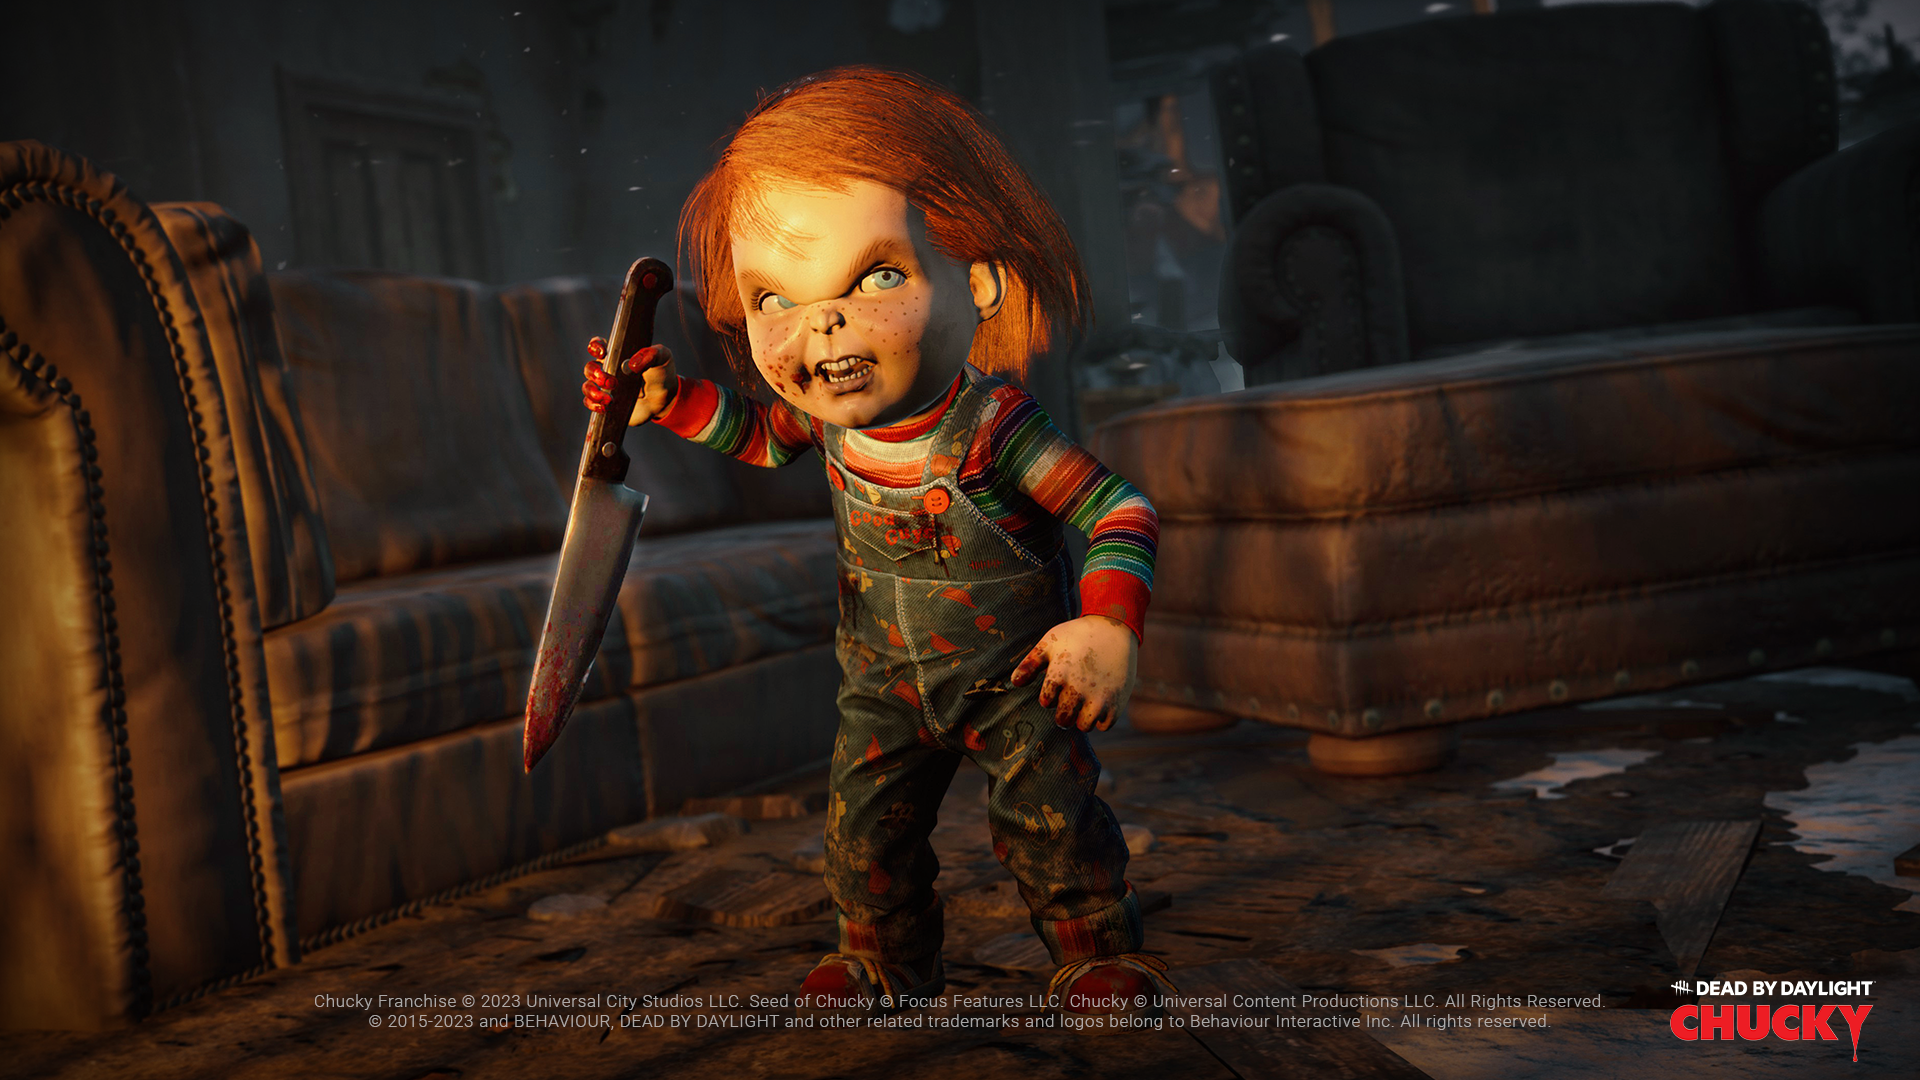 Toy of Terror: Chucky Unleashes Havoc in Dead by Daylight